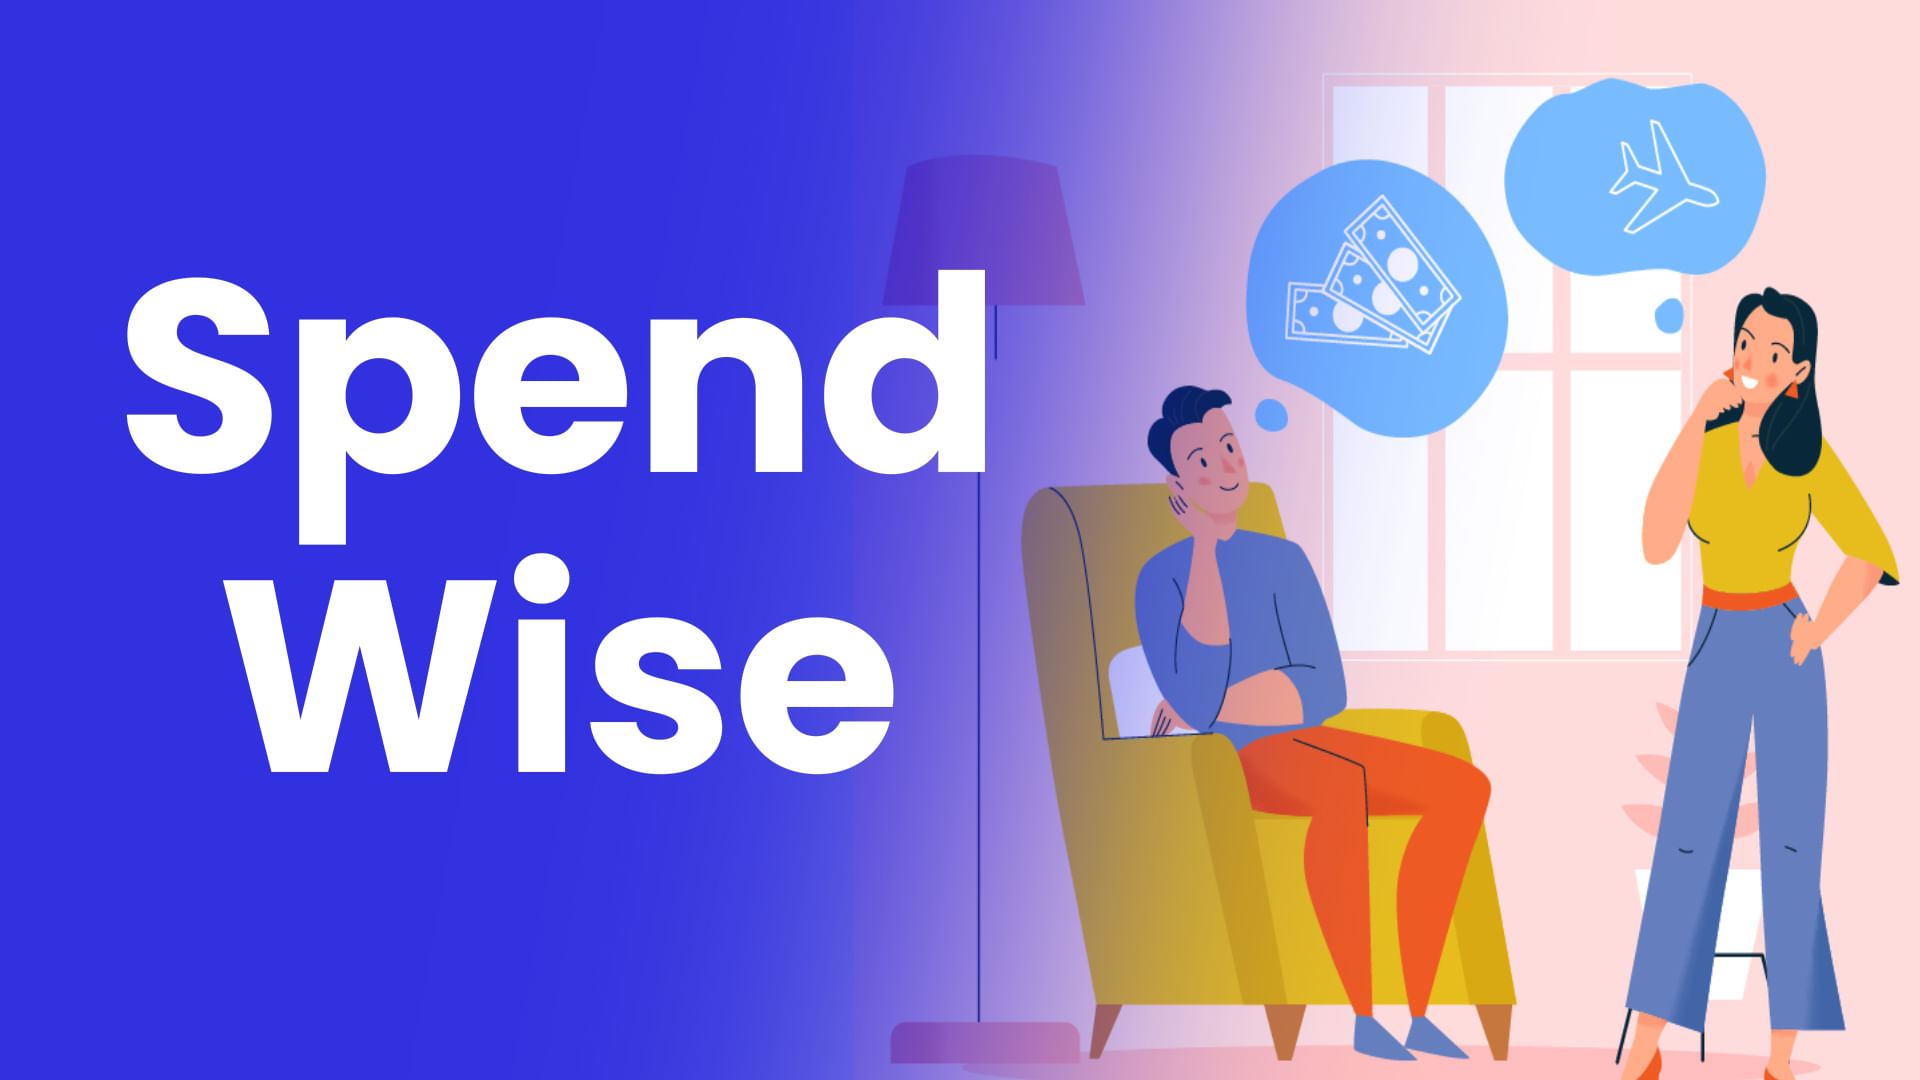 Spend Wise